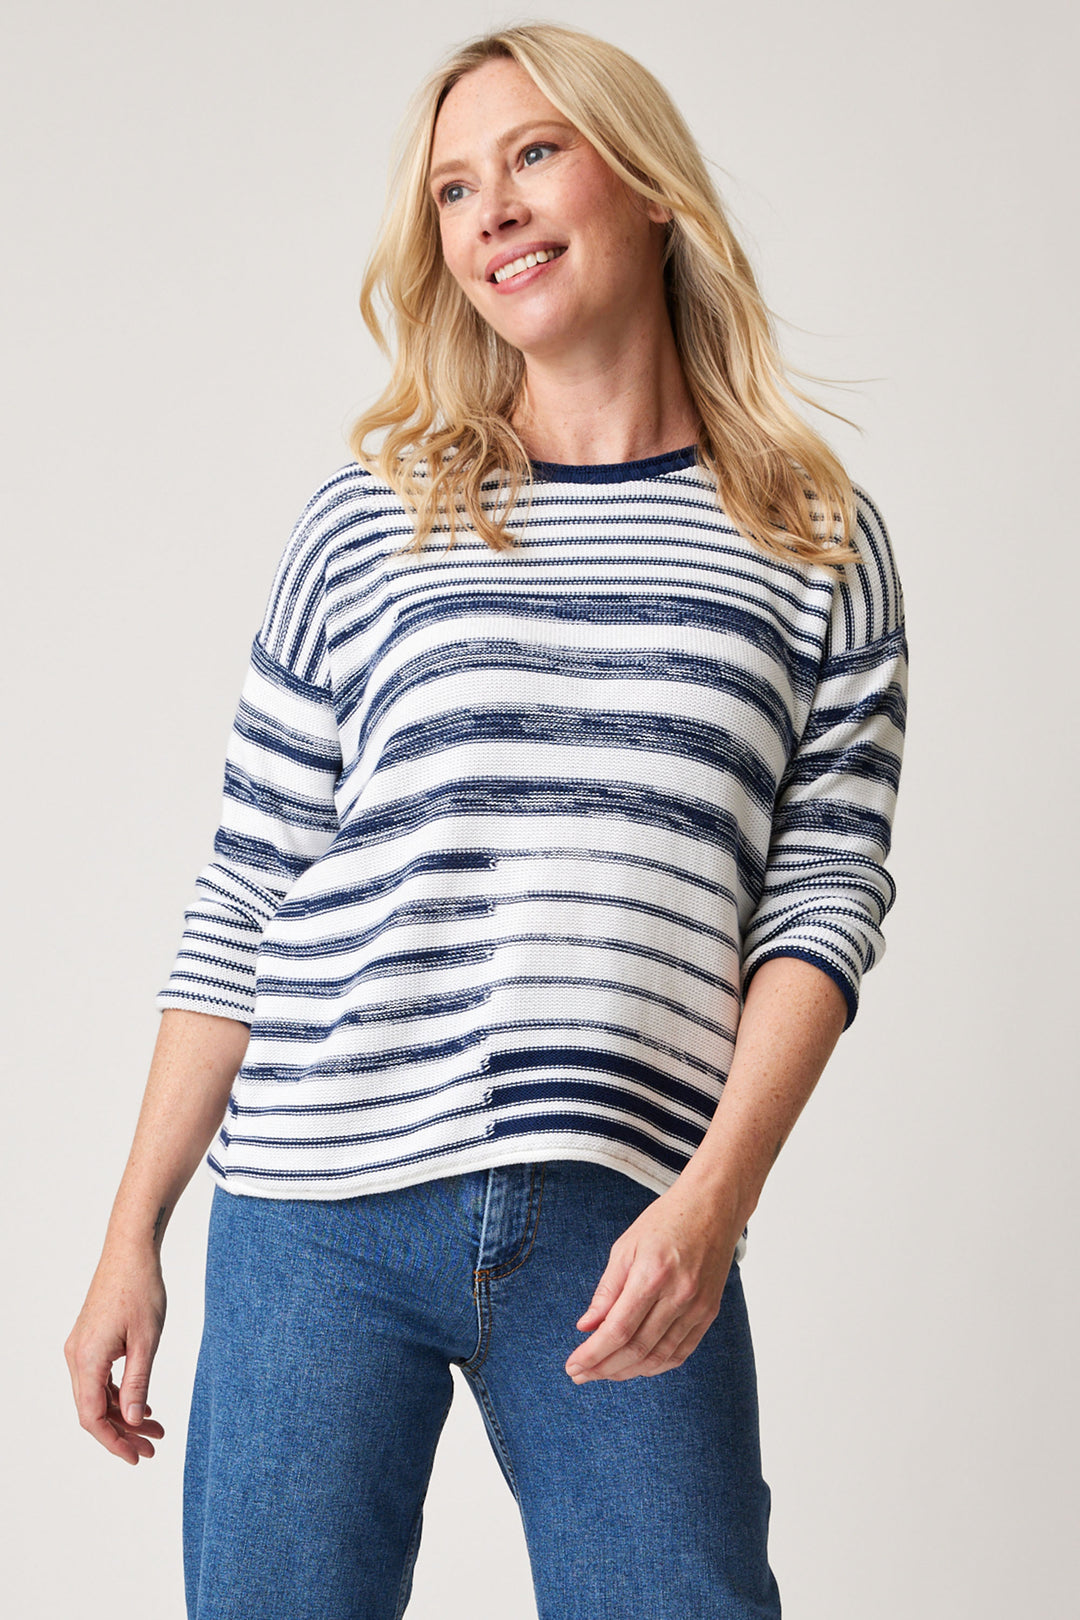 Cotton Country Spring 2024 The knit, cotton fabric is comfy and complements the round neckline and casual dropped 3/4 length shoulders.